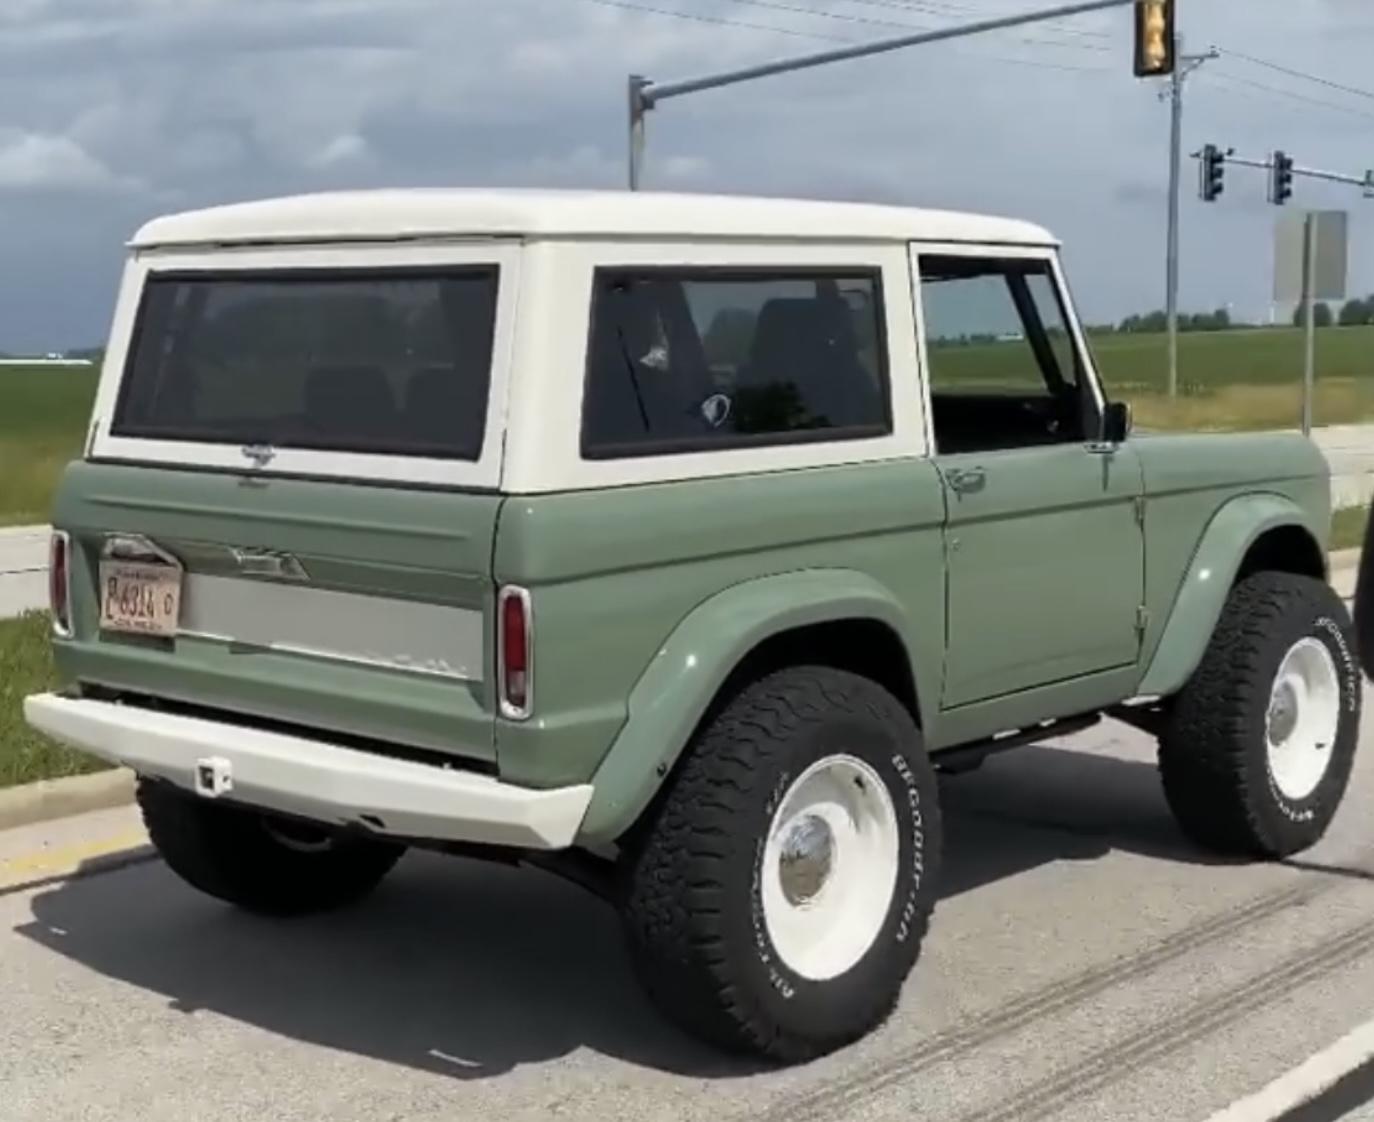 Ford confirms a green 2022 Bronco color for MY22! *Not Filson Wildland